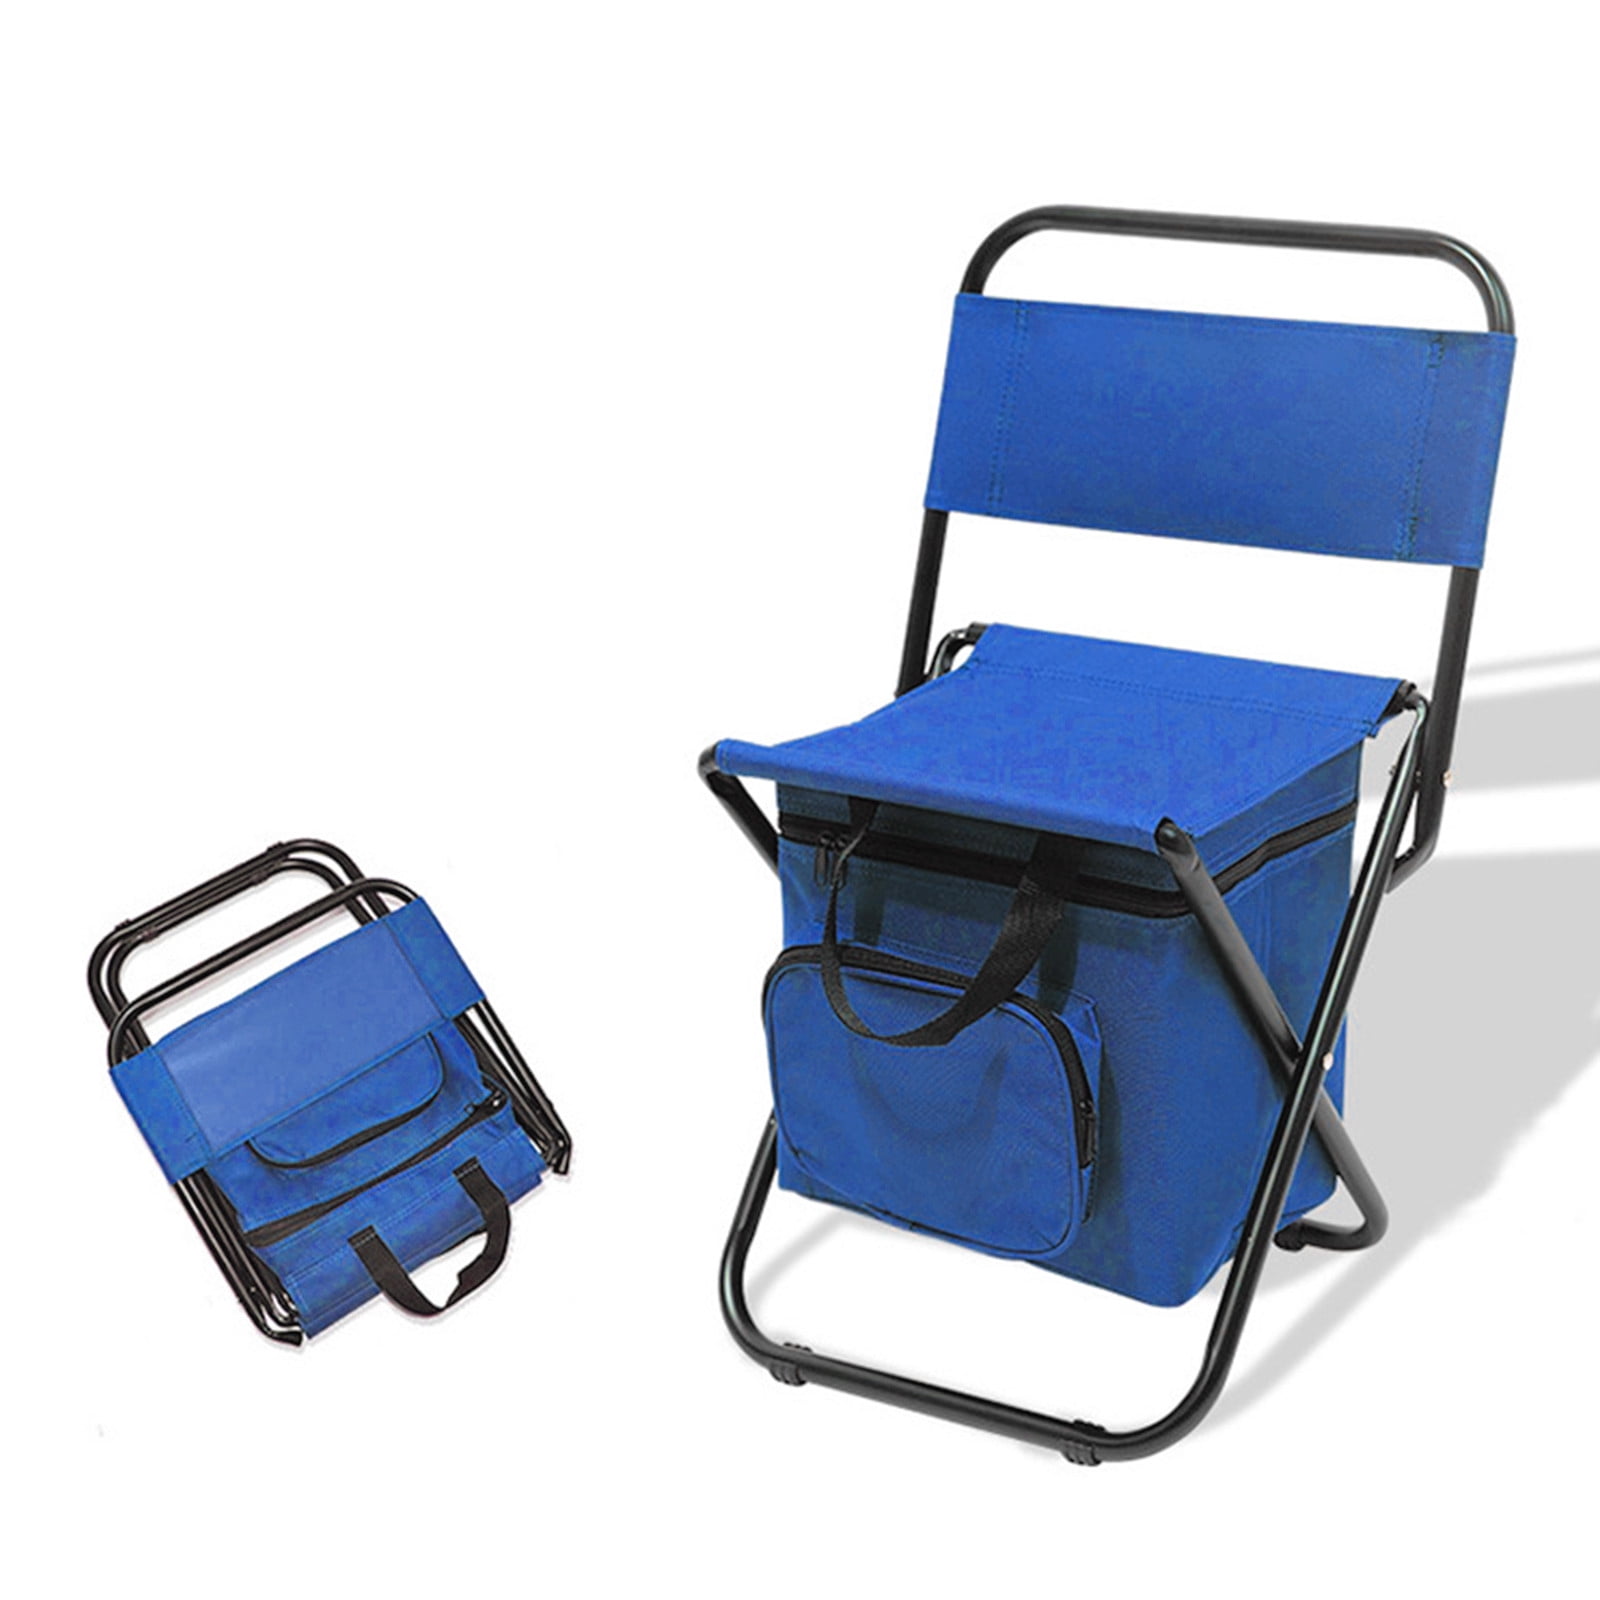 Back to School Saving! Feltree Outdoor Folding Chair With Cooler Bag  Compact Fishing Stool Fishing Chair With Double Oxford Cloth Cooler Bag for  Fishing/Beach/Camping/Family/Outing 